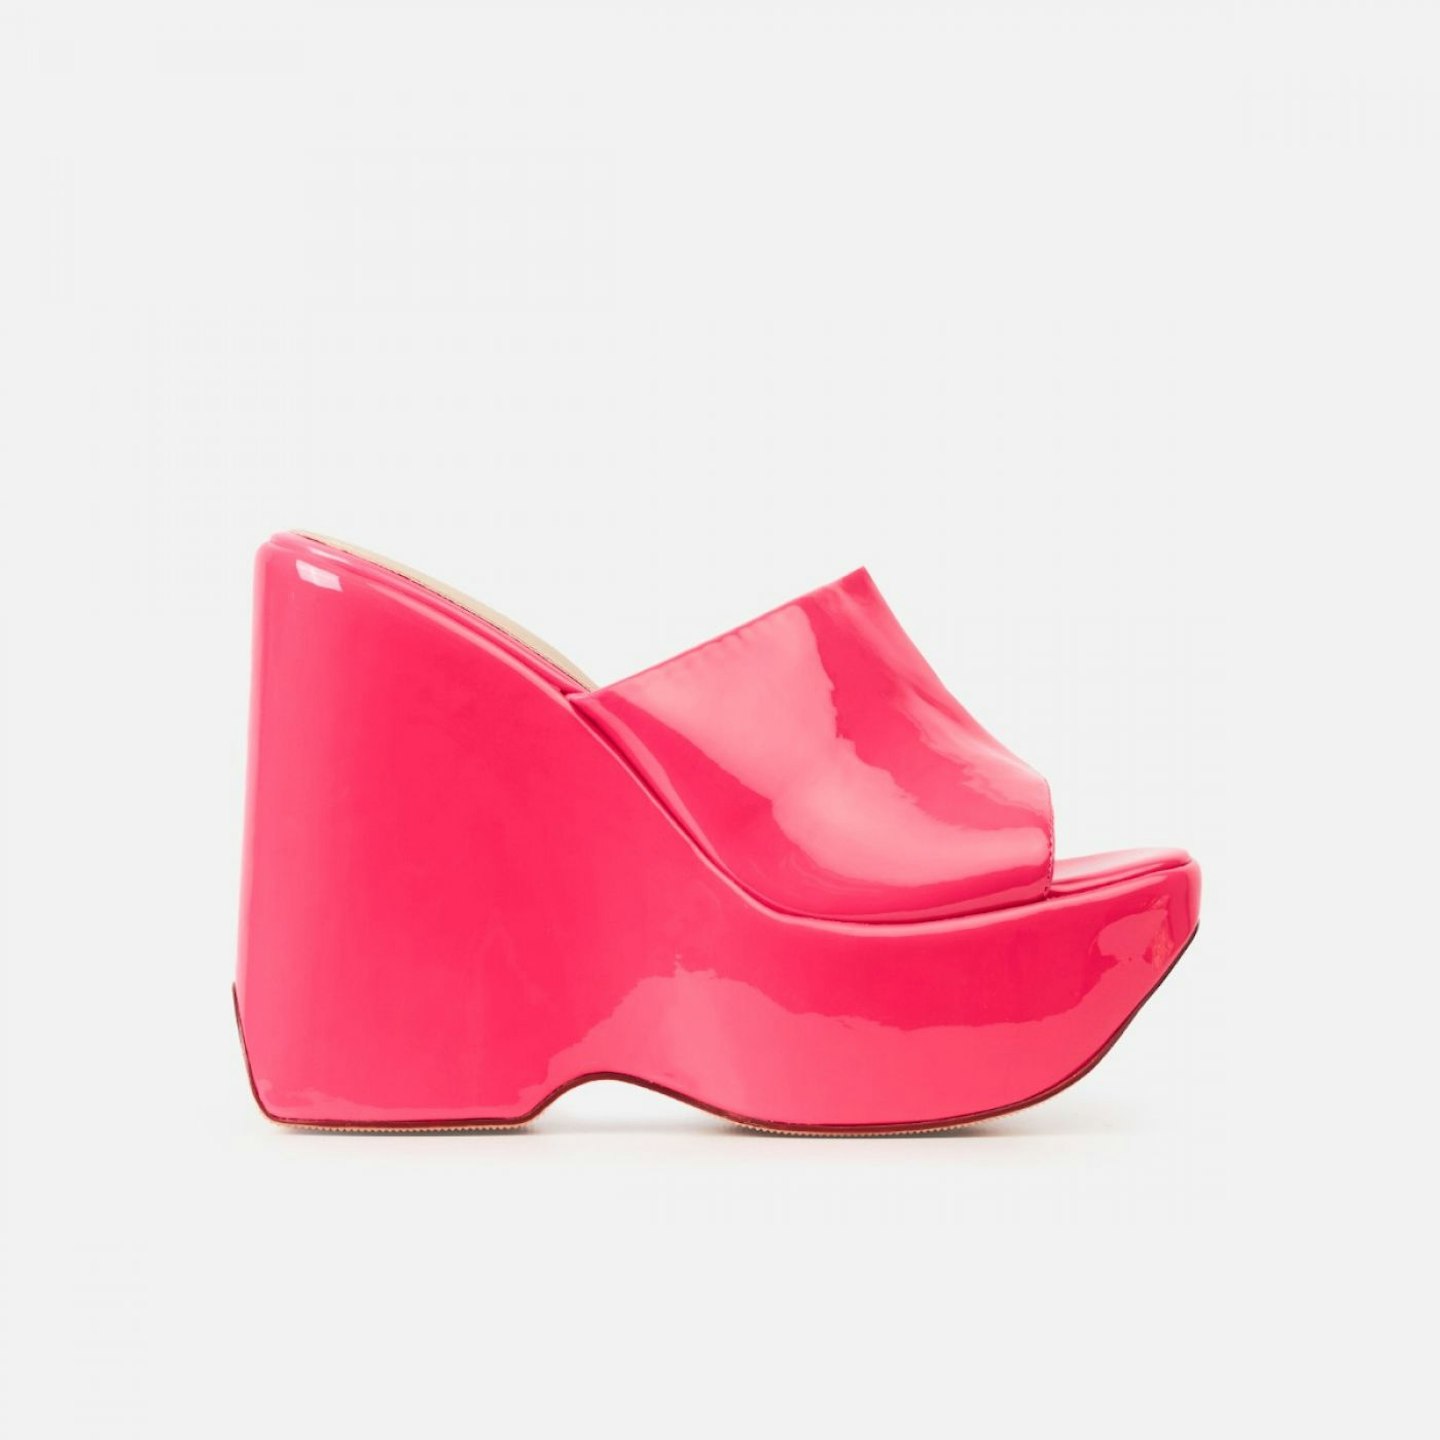 Simmi rolo pink patent high mule wedges